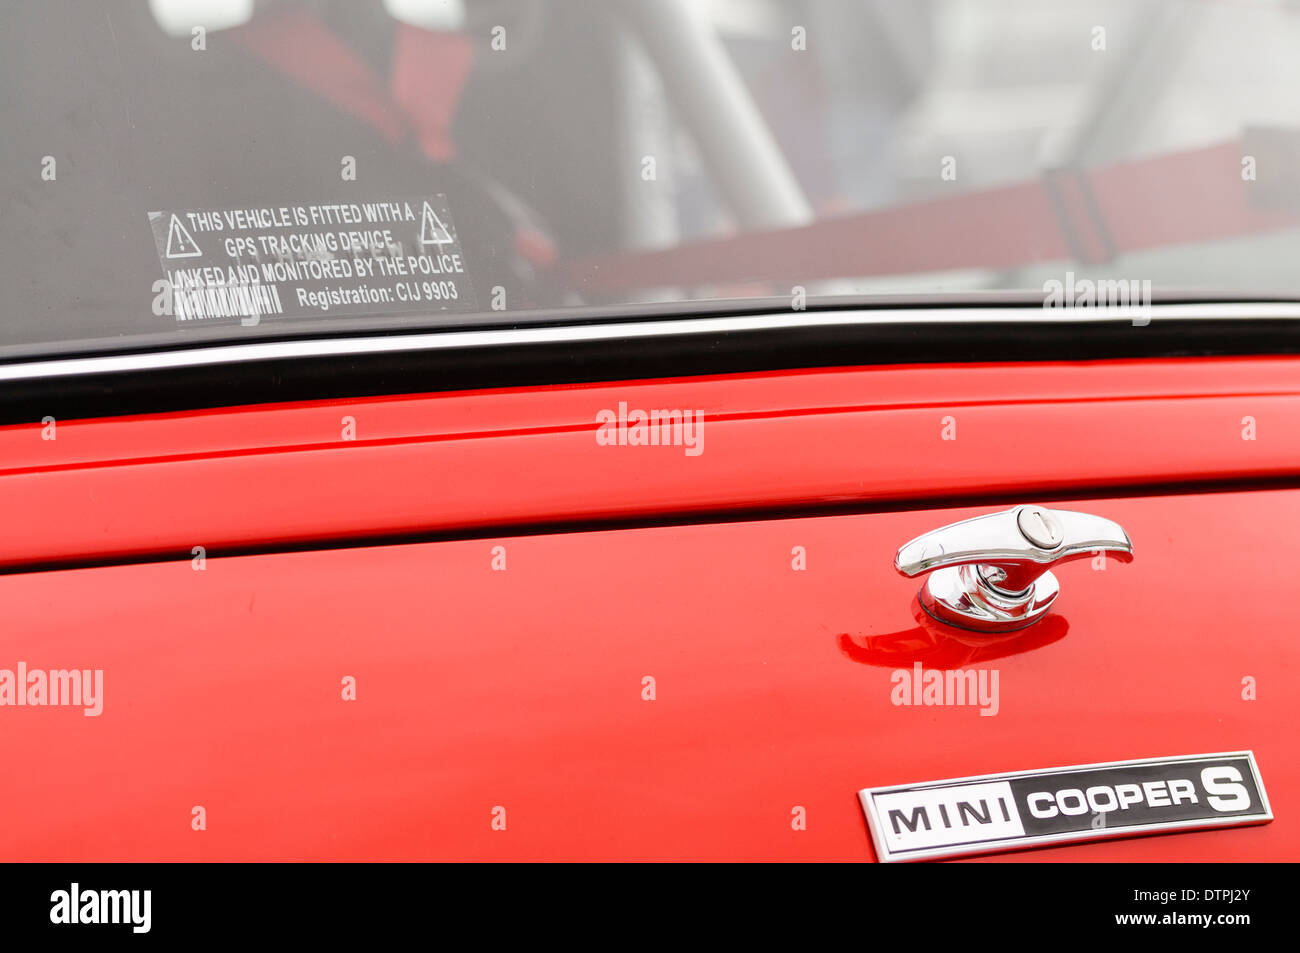 Mini Cooper S with a warning that a GPS tracker is fitted to prevent theft. Stock Photo